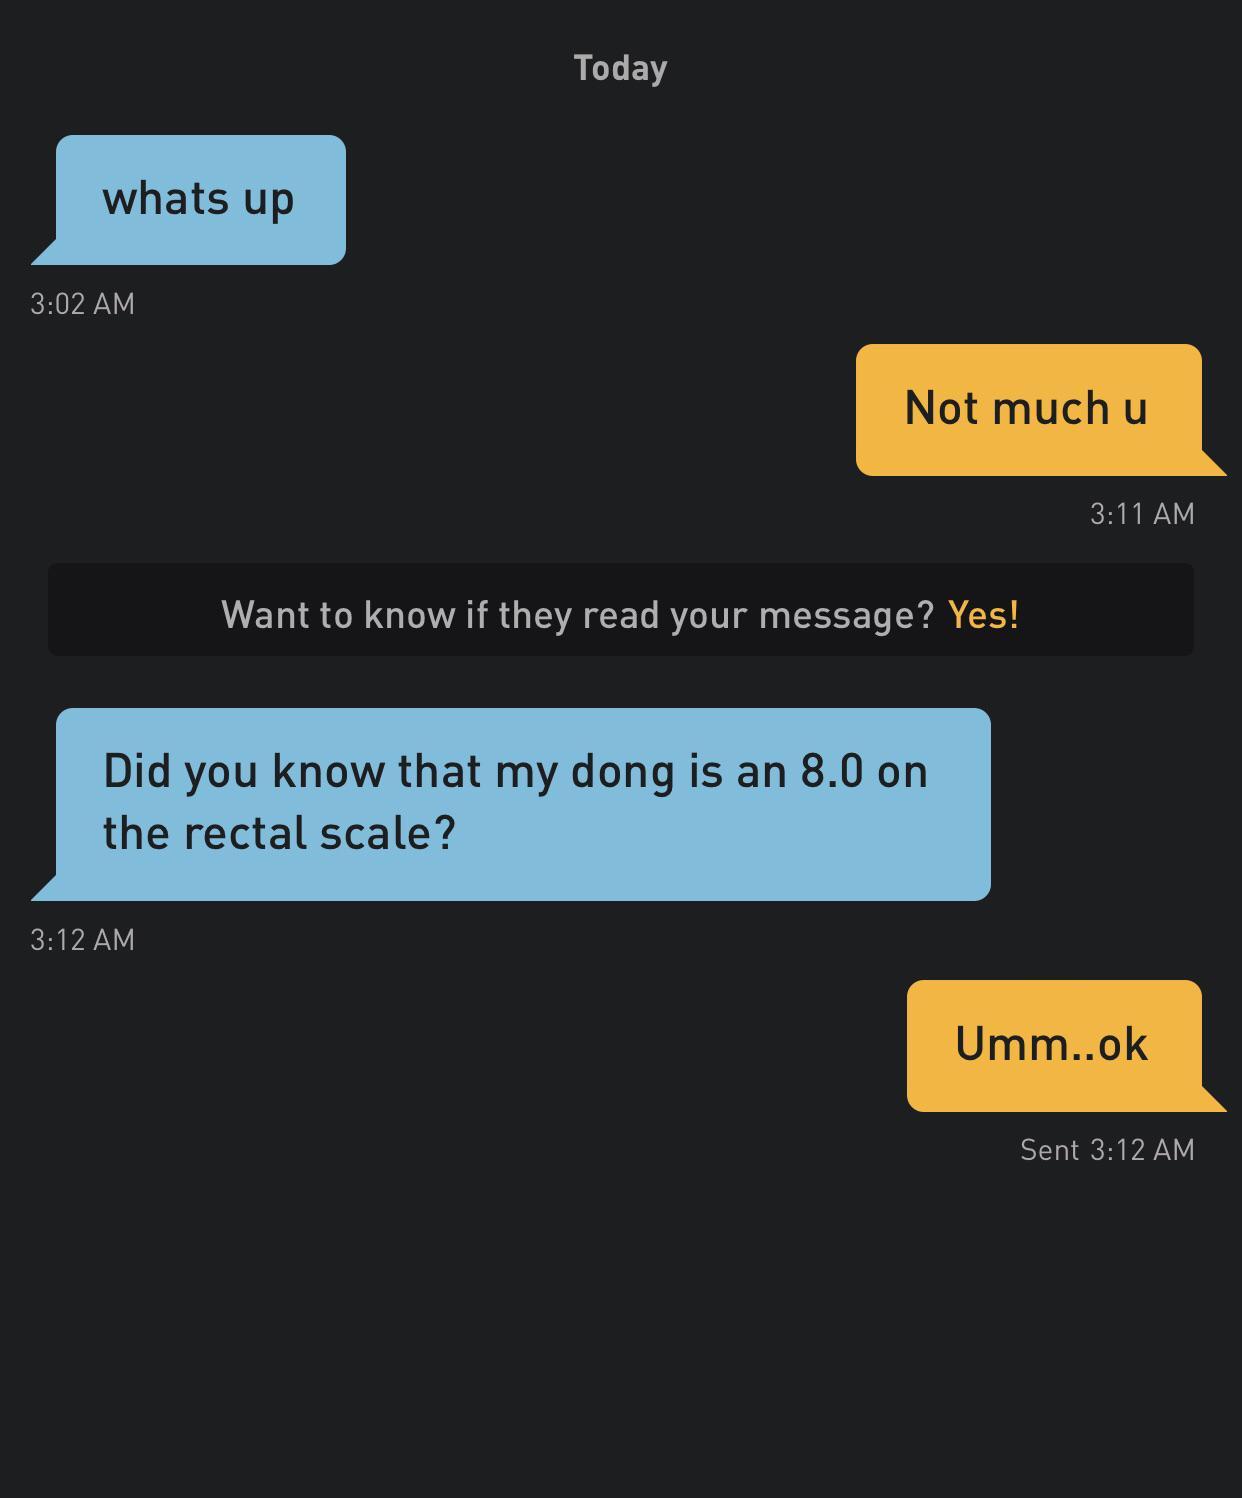 screenshot - Today whats up Not much u Want to know if they read your message? Yes! Did you know that my dong is an 8.0 on the rectal scale? Umm..ok Sent